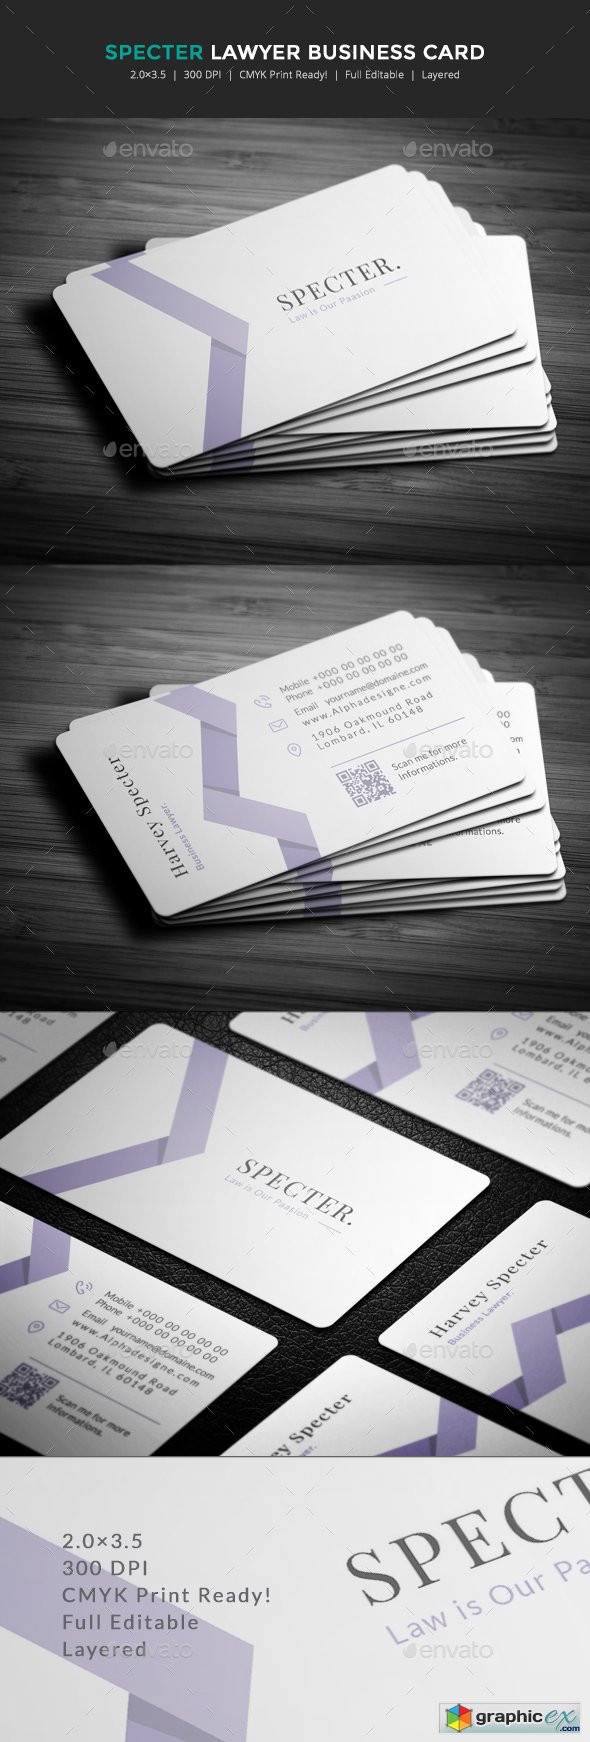 Specter Lawyer Business Card